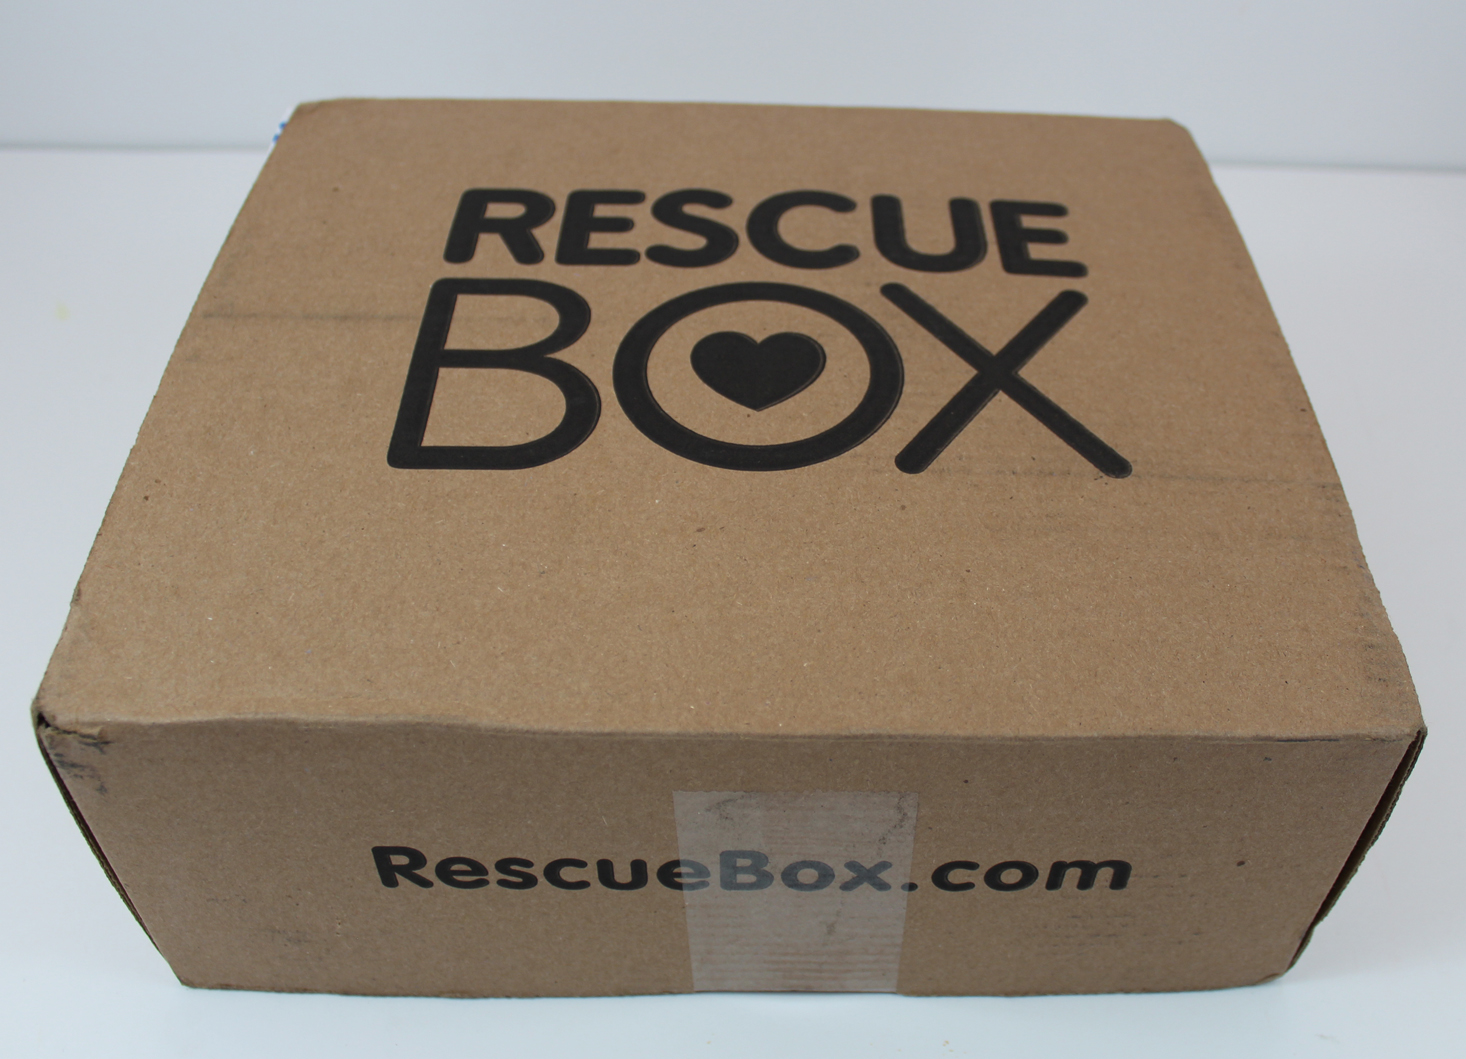 RescueBox Dog Subscription Box Review – September 2017